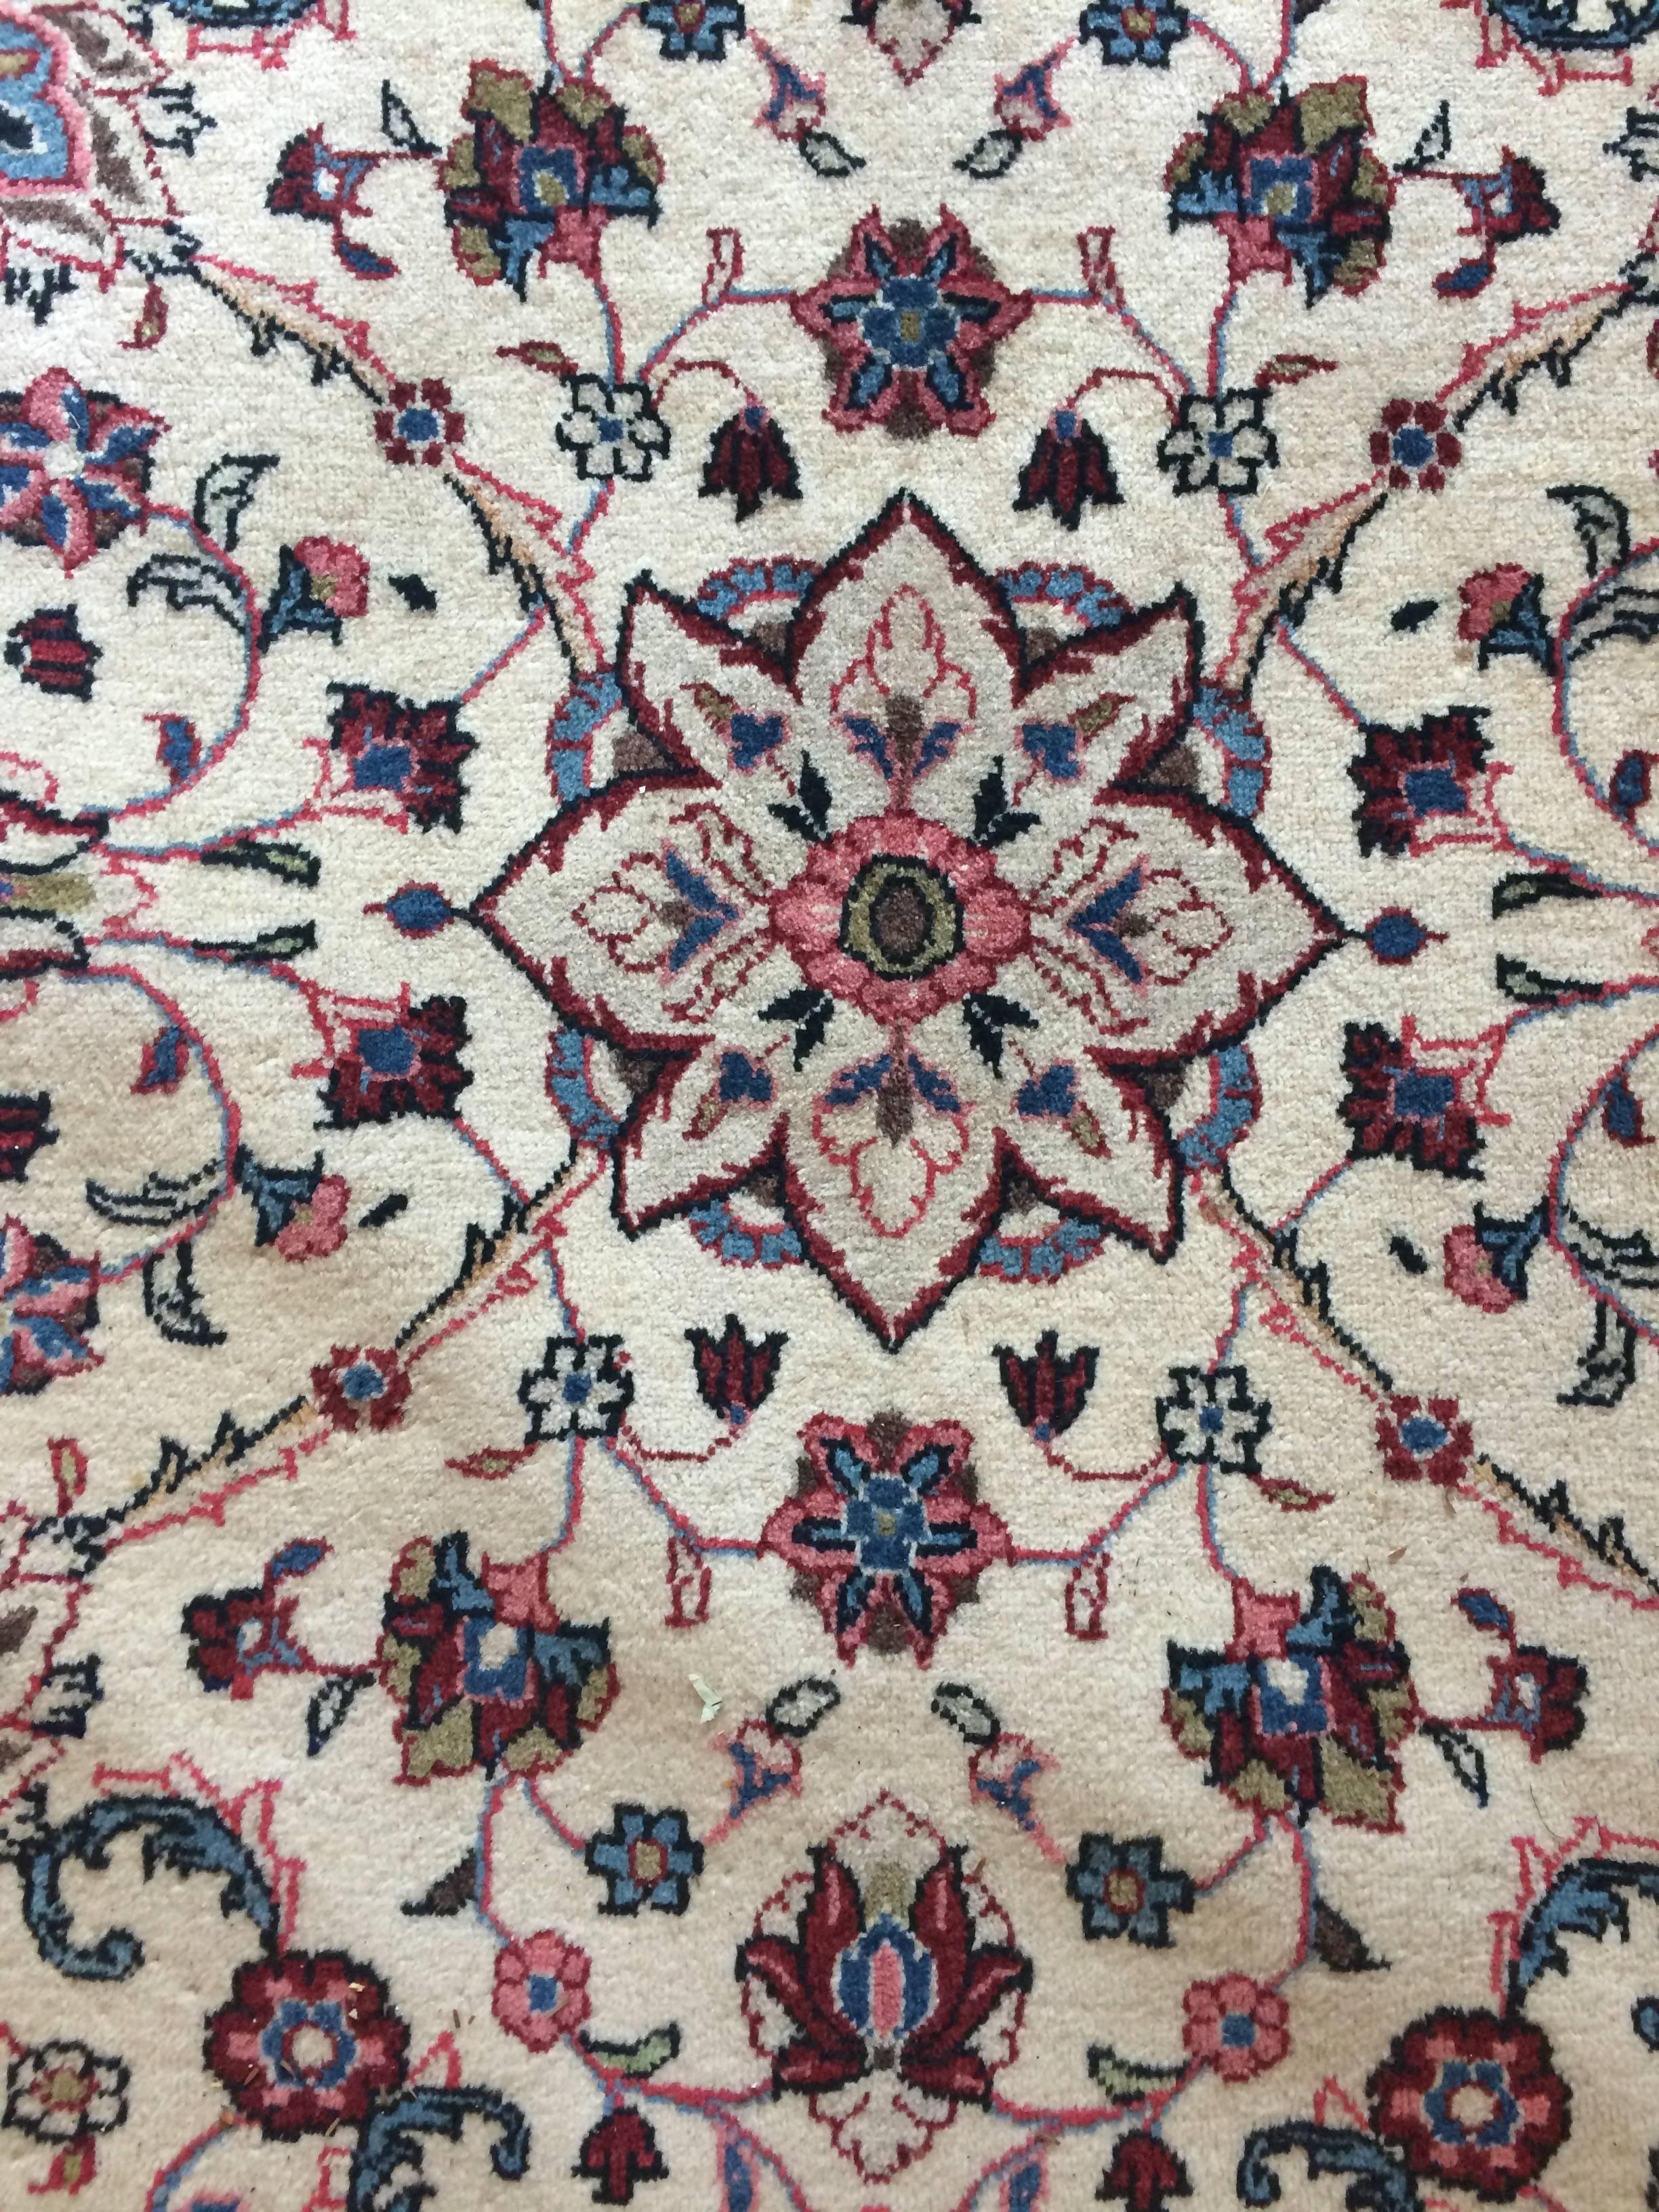 Beautiful Pakistani Isfahan wood rug having a Classic pattern in blue, cranberry, pink and tan against a cream background. Rich decorative border around the periphery and great craftsmanship. Leather binding around back periphery for extra support.